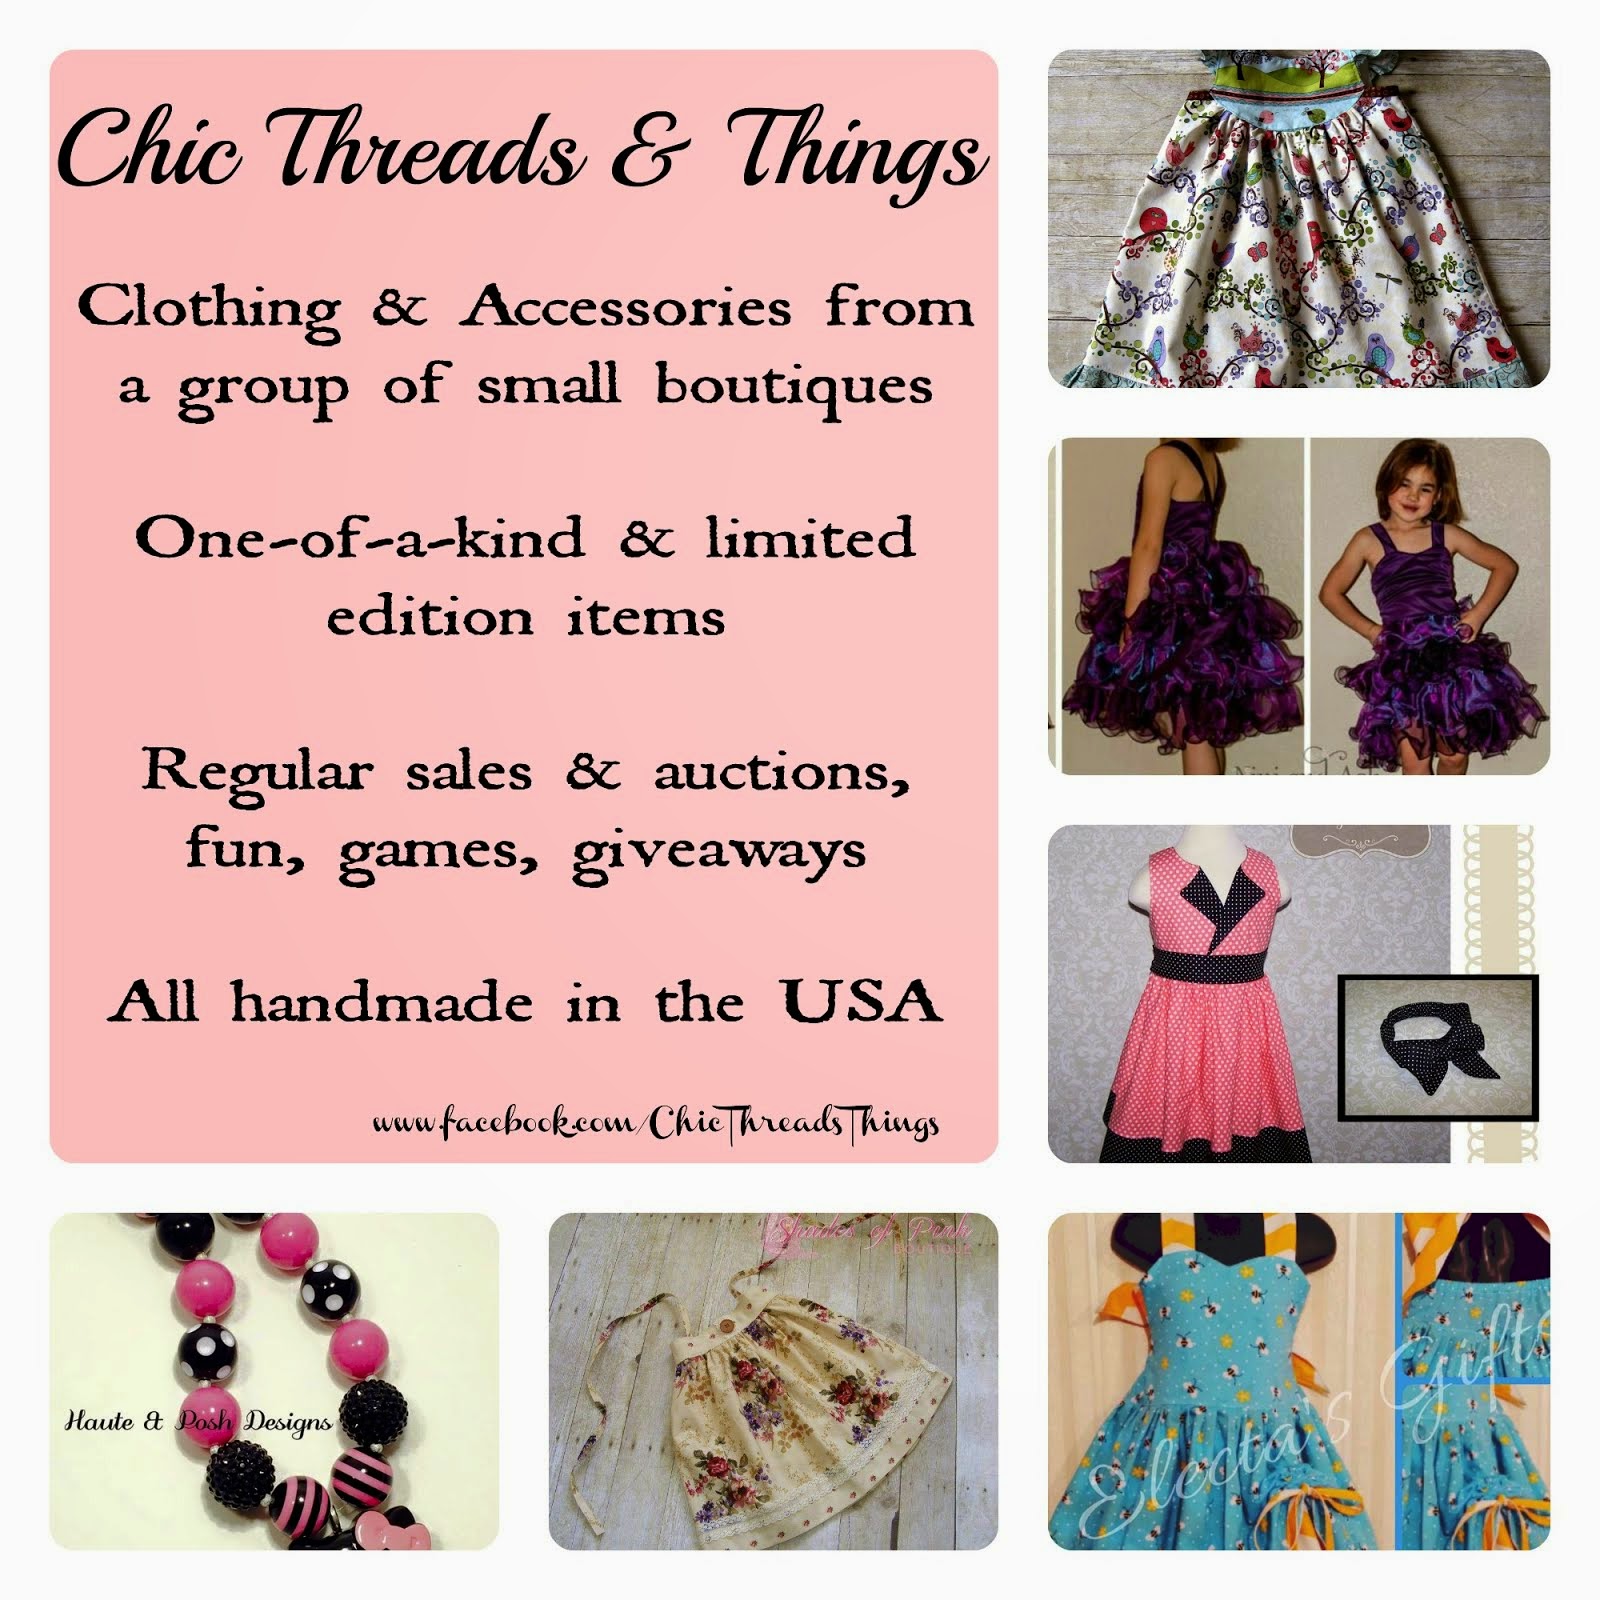 I also sell my beautiful sewing creations at Chic Threads & Things!